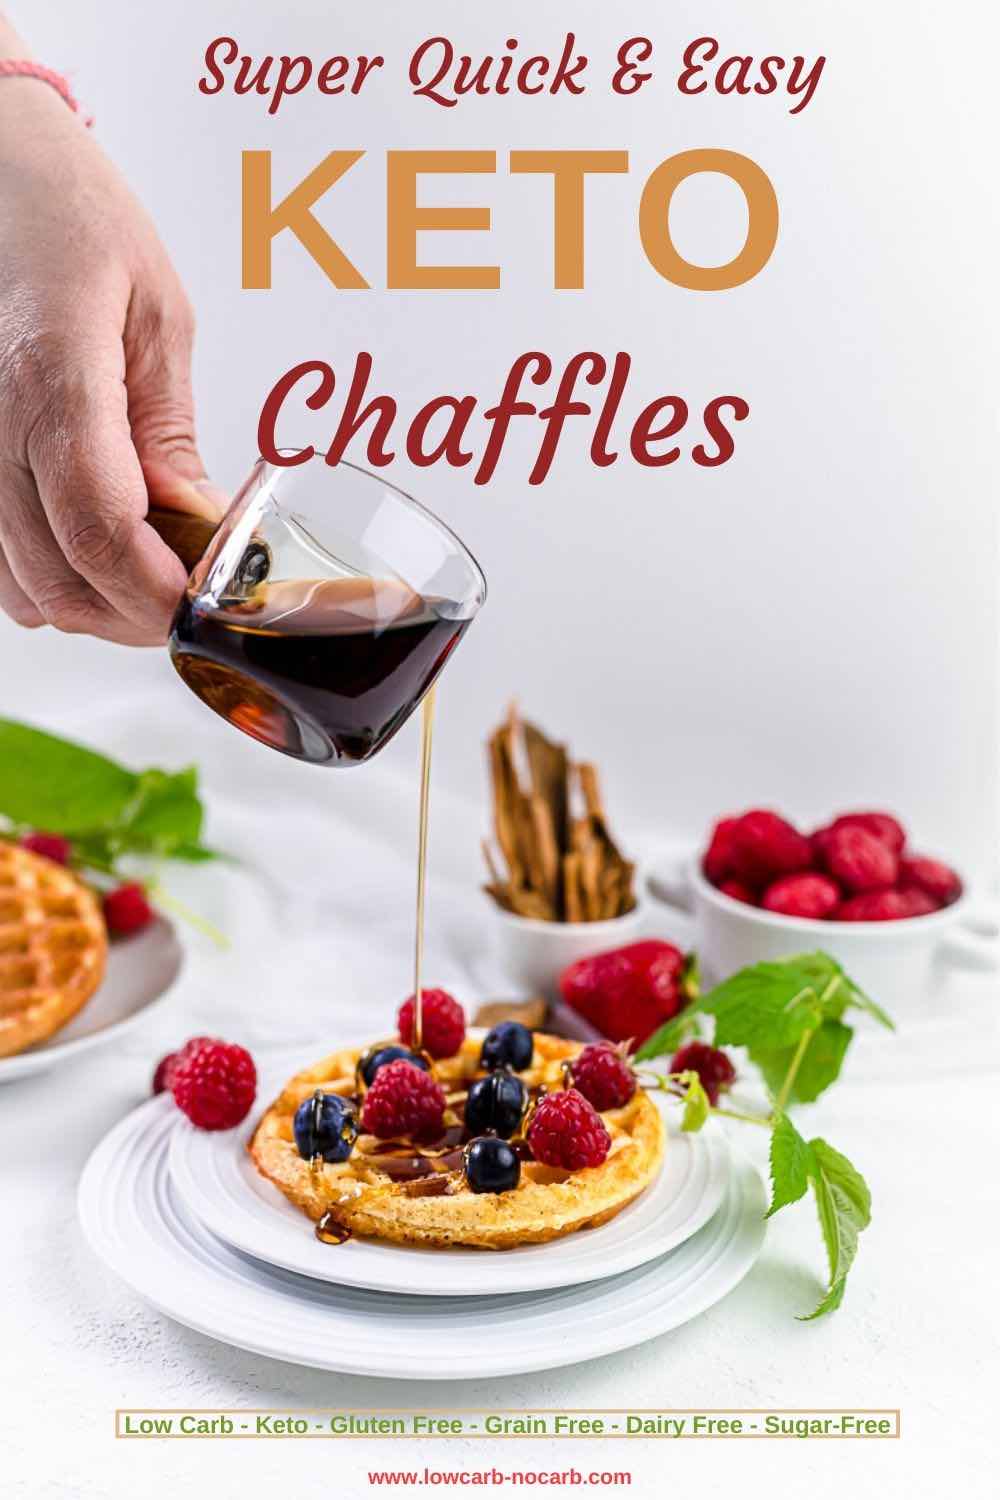 Chaffles - cheese and eggs waffles